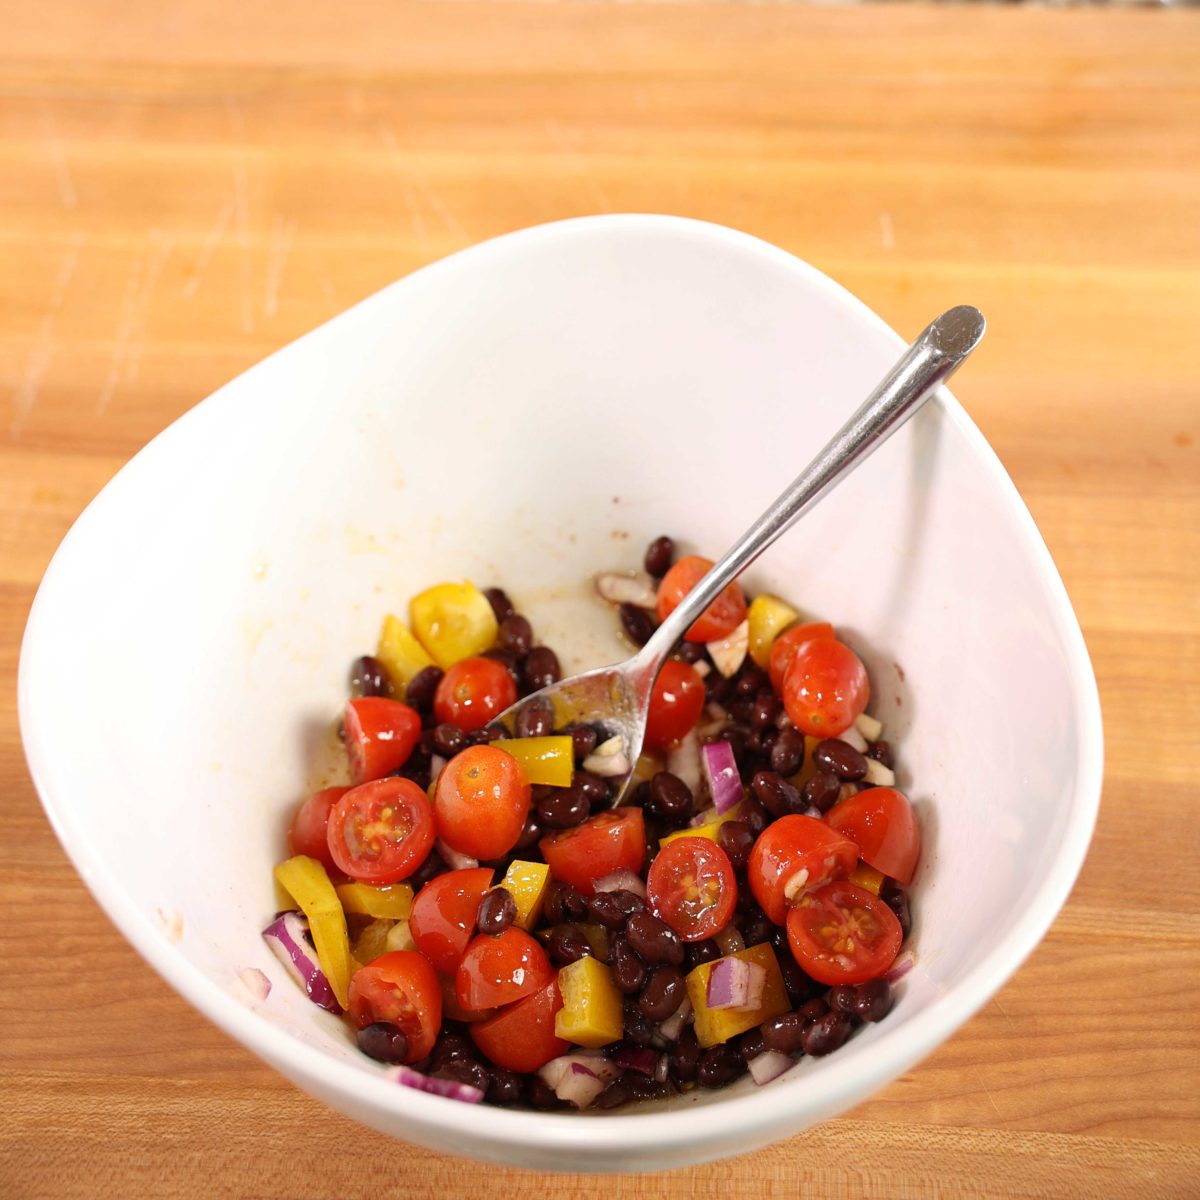 black beans, tomatoes, and yellow peppers on a white bowl with a spoon on the side.